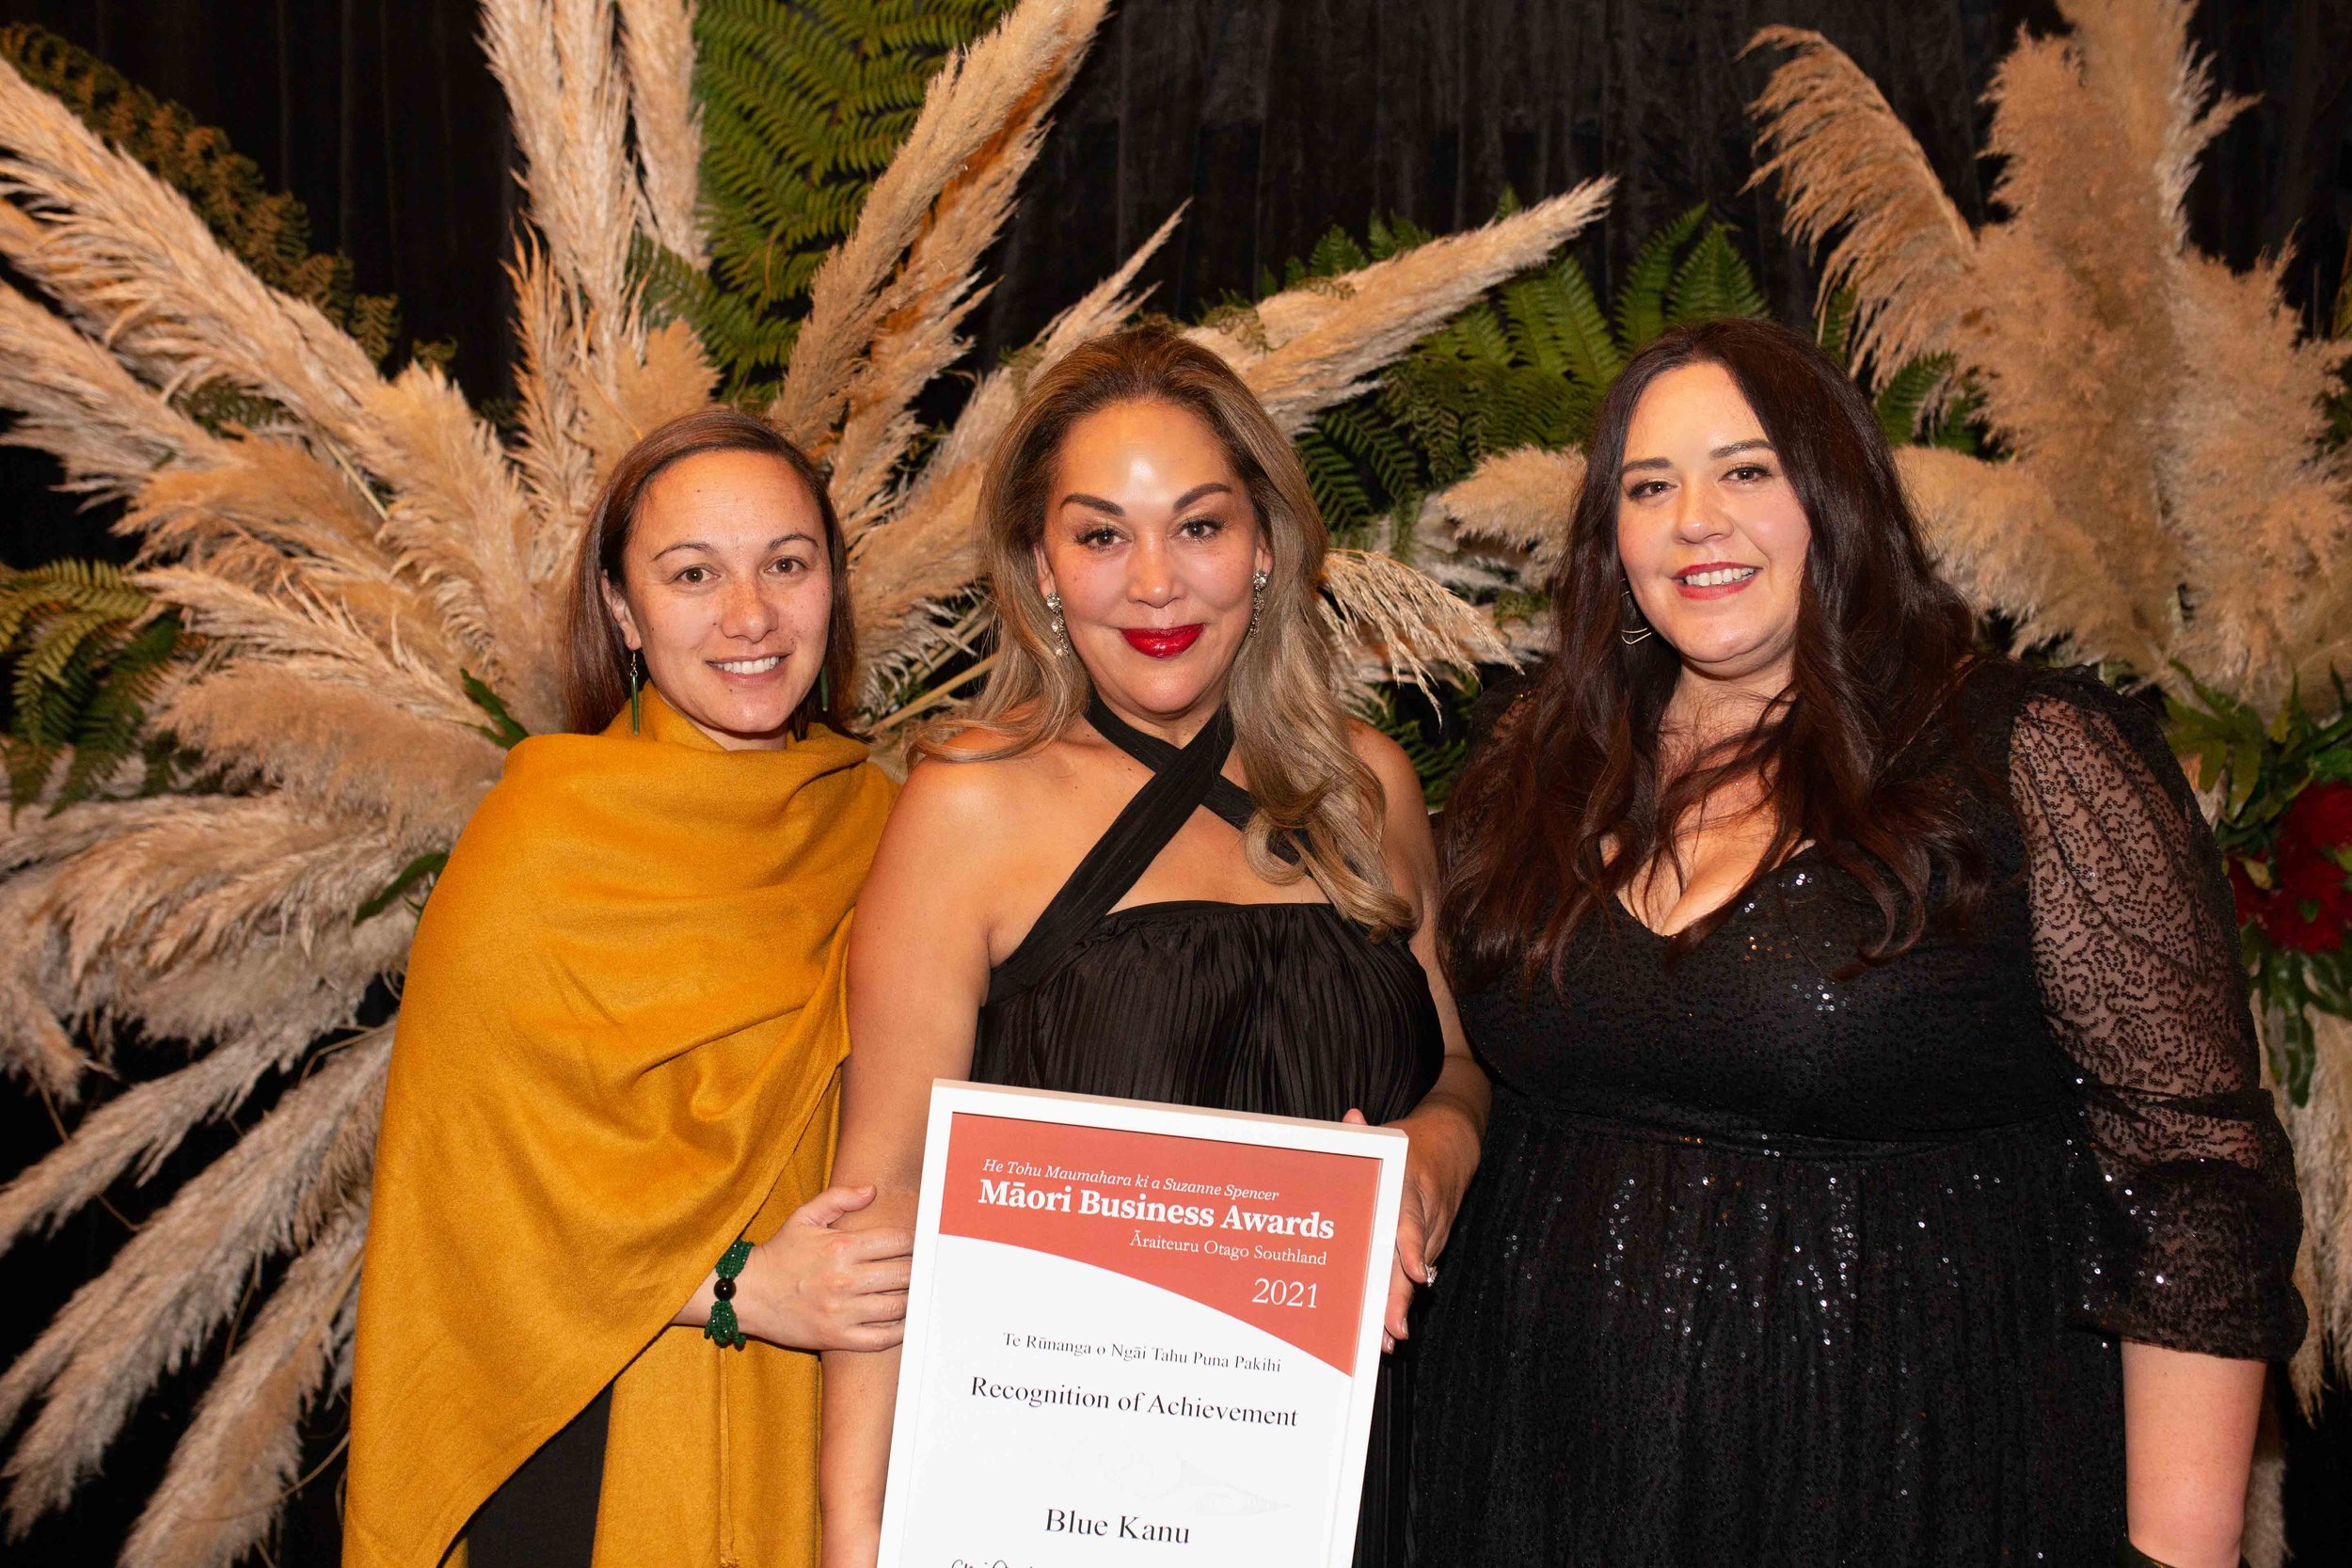  Ngāi Tahu Recognition of Achievement presented to Karen Hattaway, with Aimee Kaio (TRoNT) and Karmela Rapata 